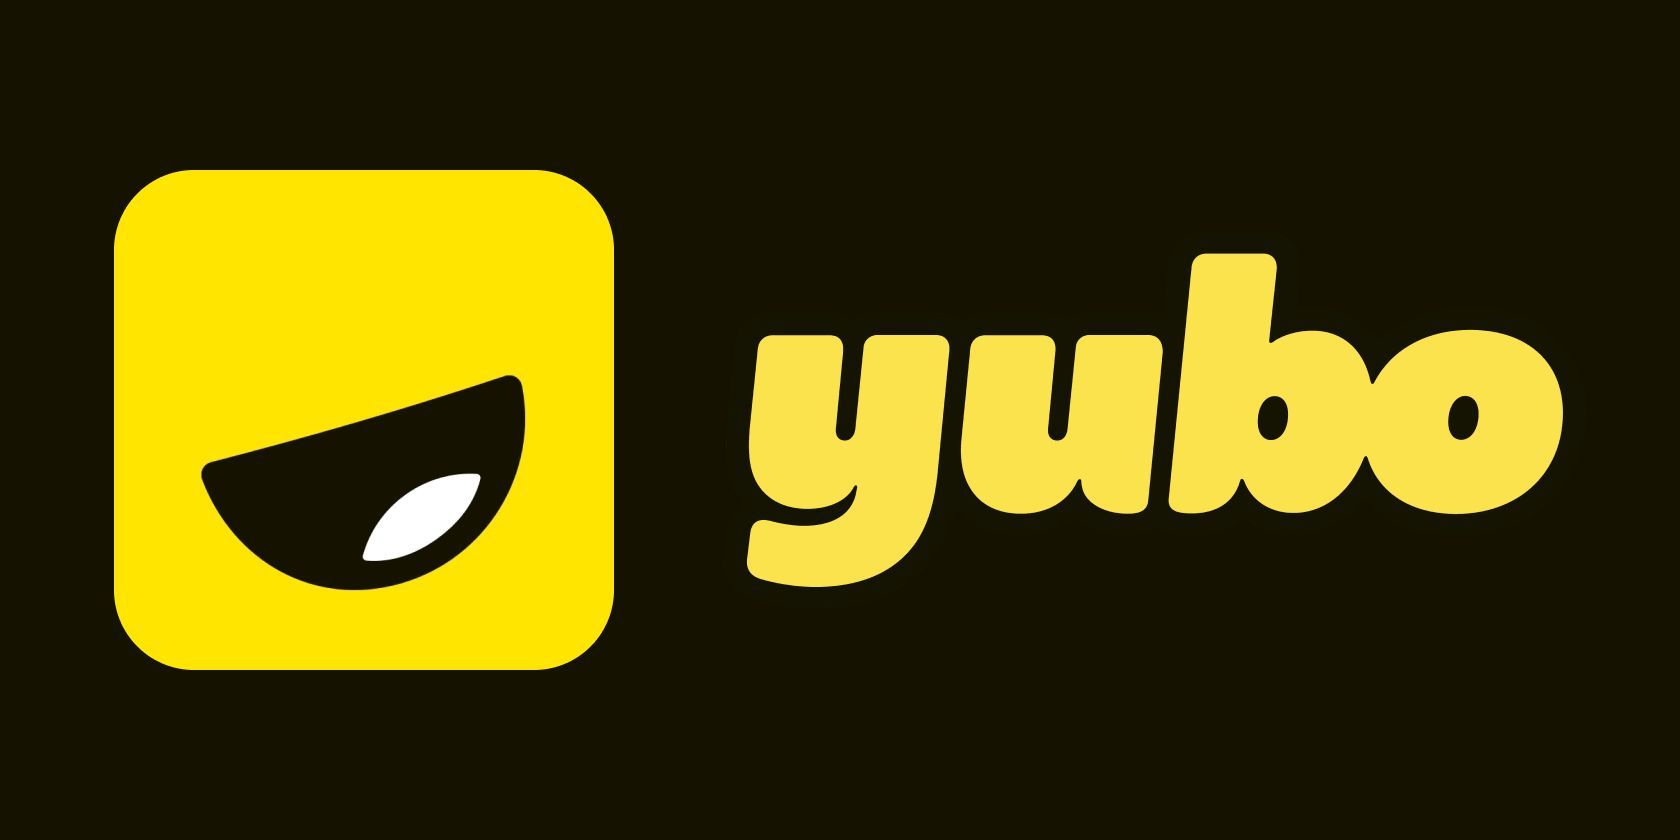 What Exactly Is Yubo, the Best App for GenZ?